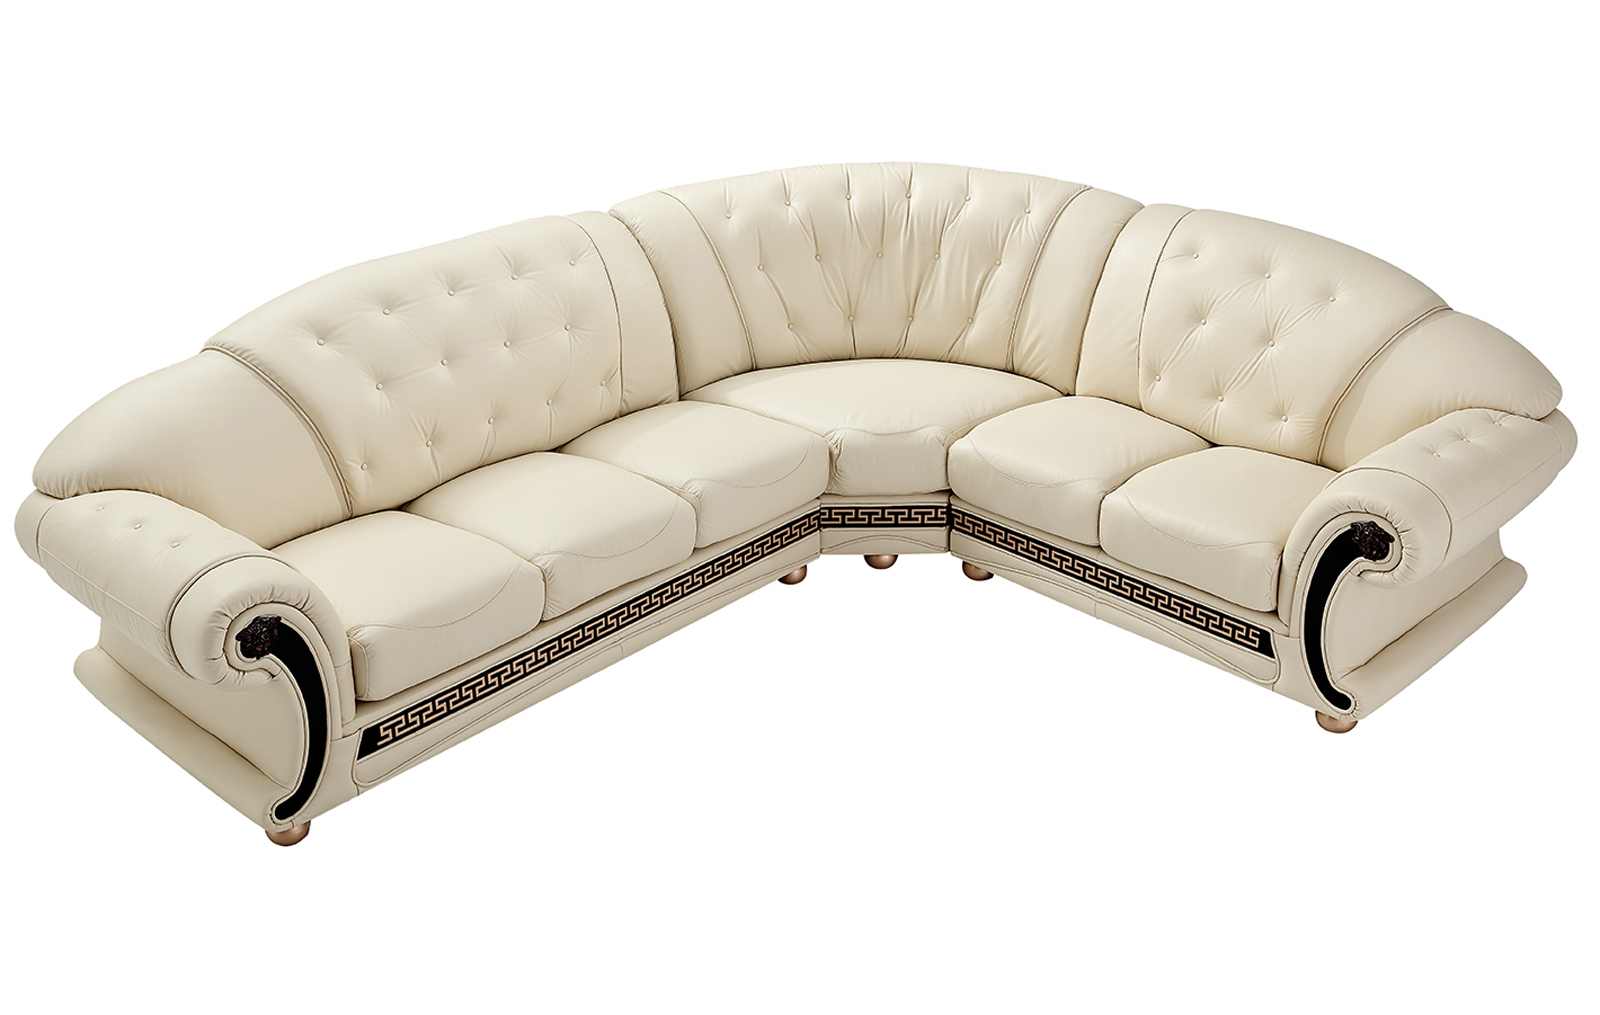 Baroque Style Sectional Set with Button Tufted Seats